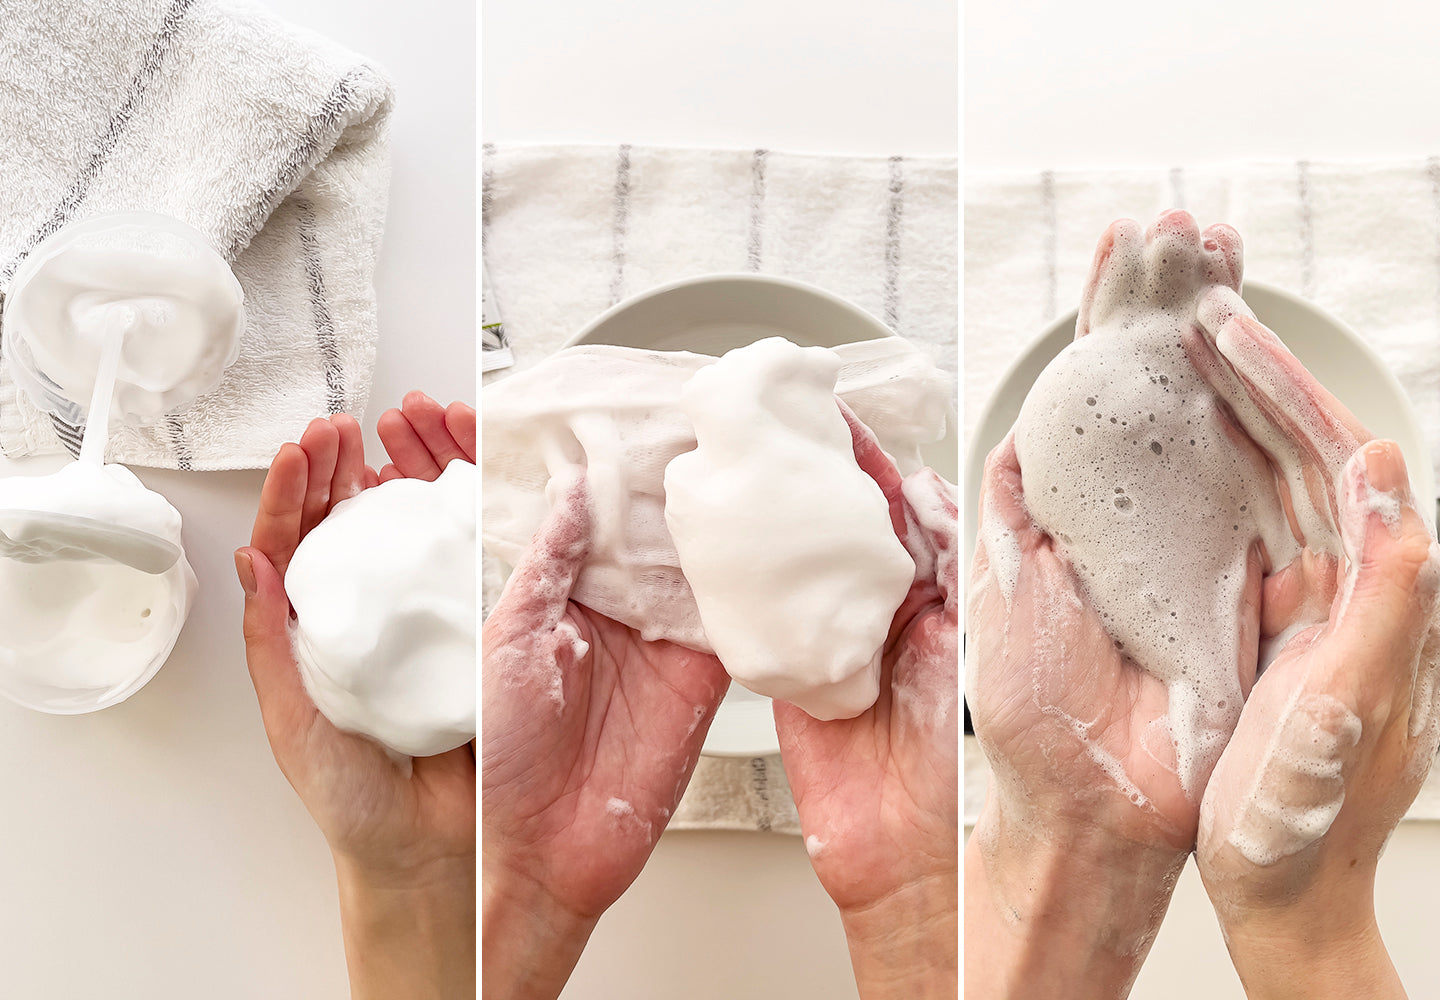 Foaming net, foam maker, or your hands? Foaming tools for face